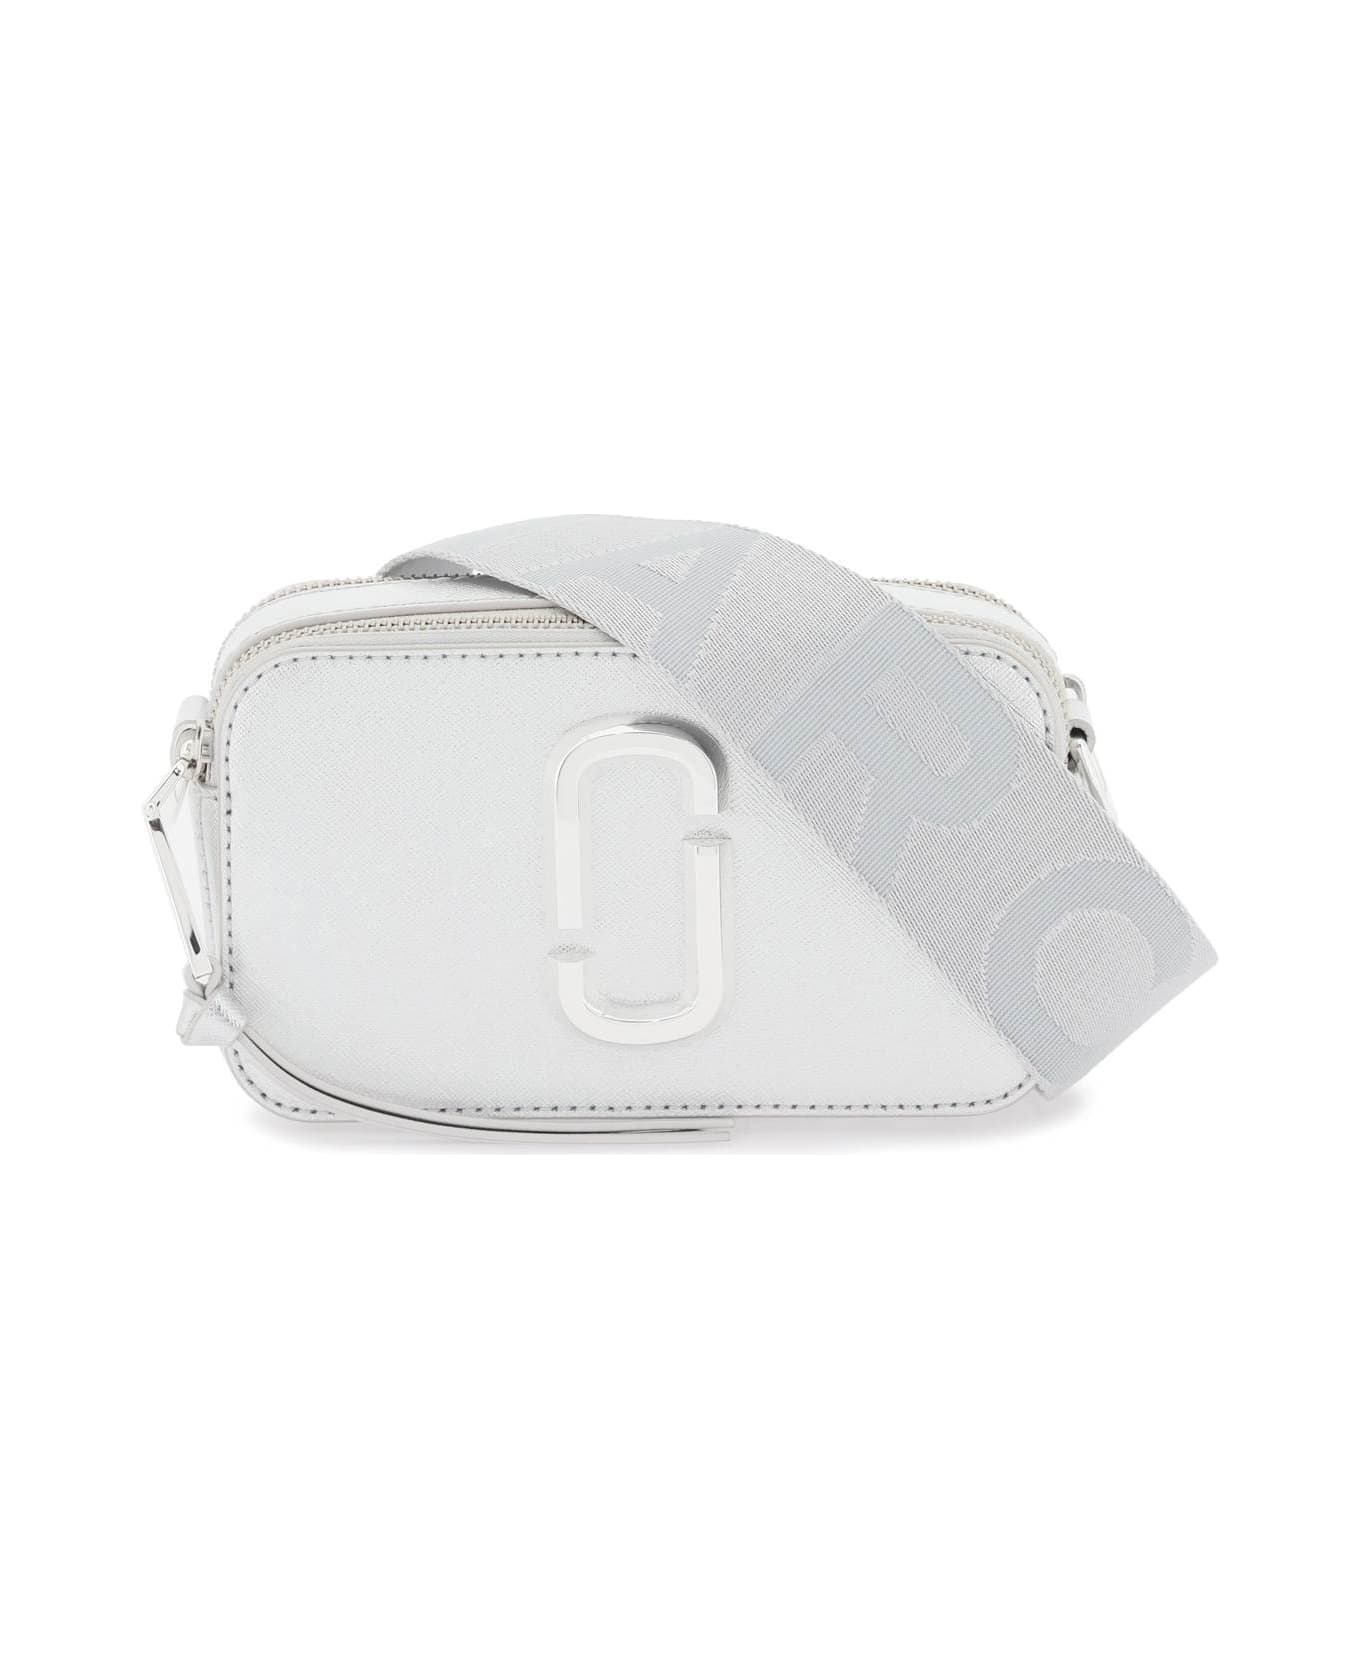 Marc Jacobs The Snapshot Leather Camera Bag - Silver